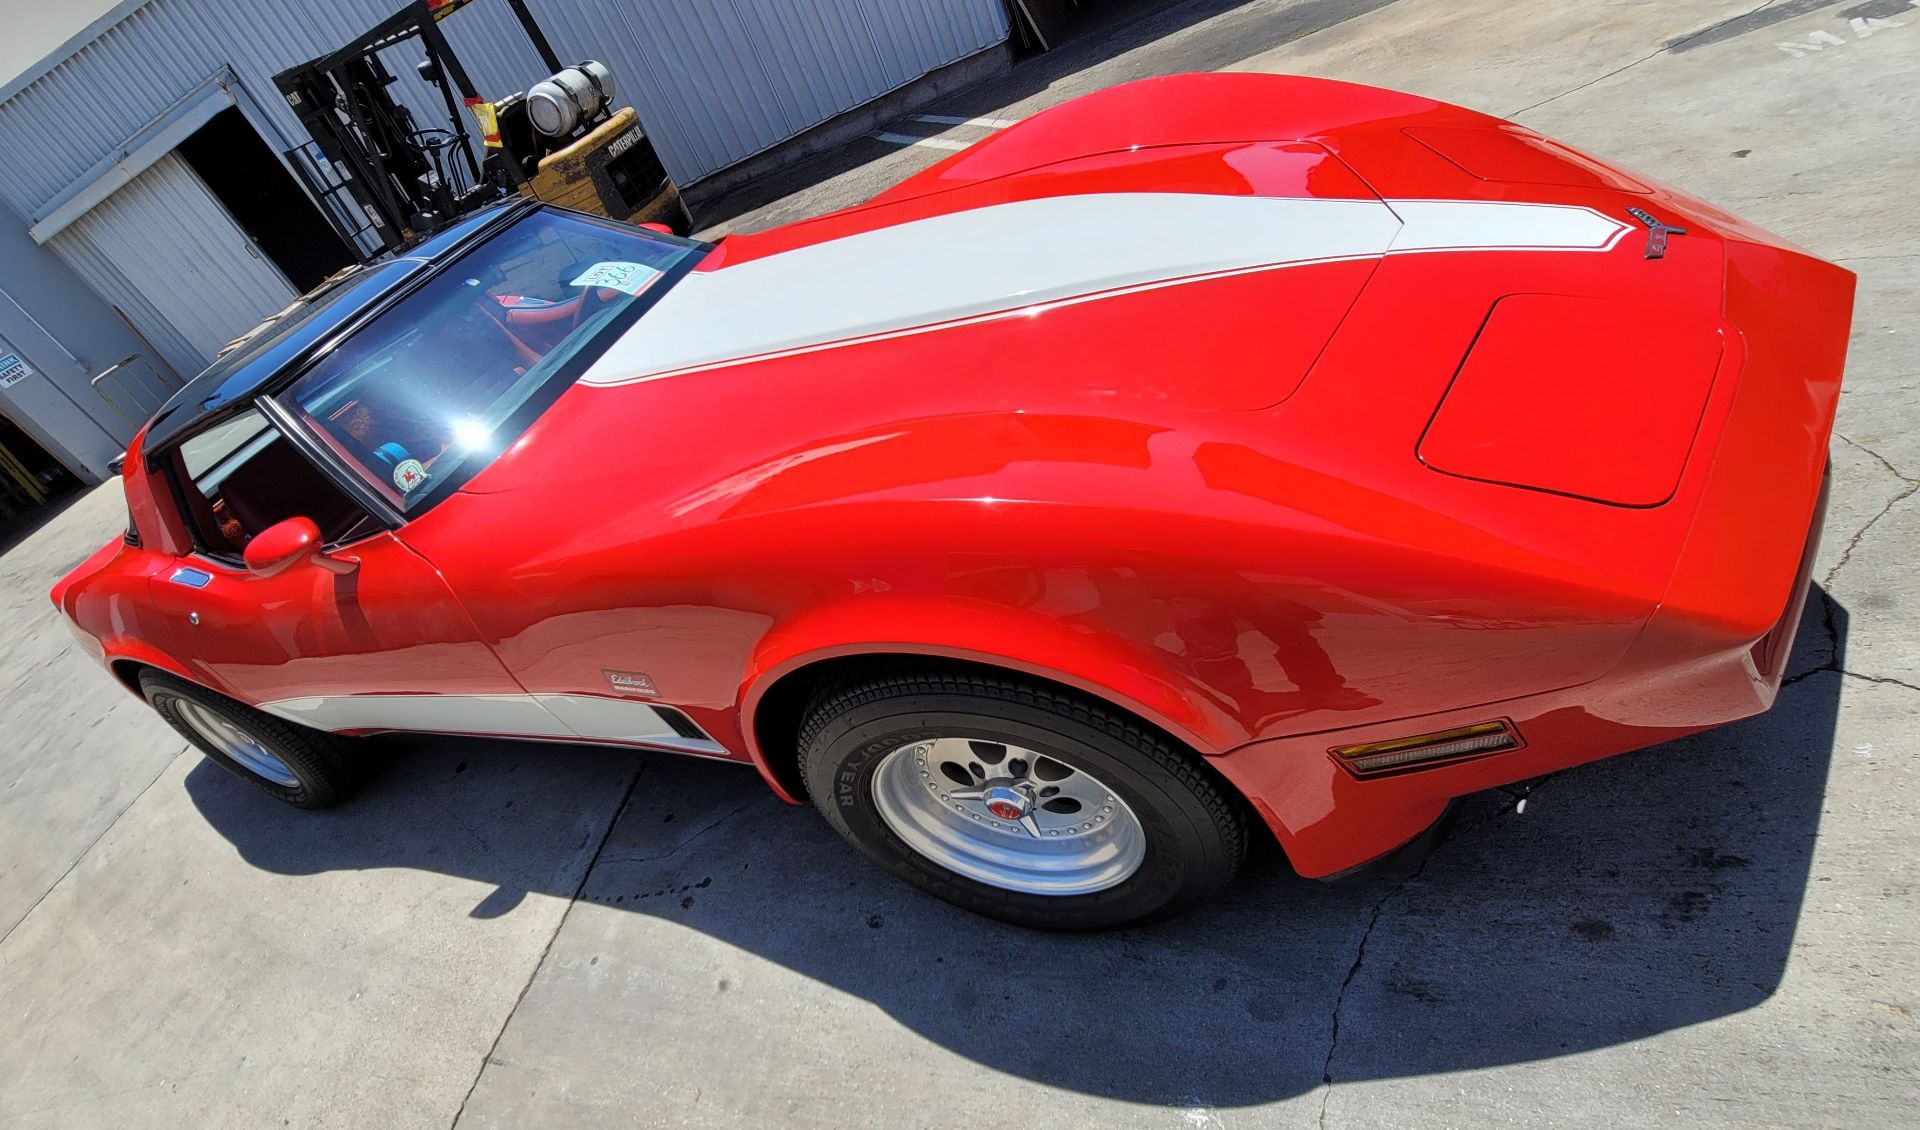 1980 CHEVROLET CORVETTE, WAS VIC EDELBROCK'S PERSONAL CAR BOUGHT FOR R&D, RED INTERIOR, TITLE ONLY. - Image 35 of 70